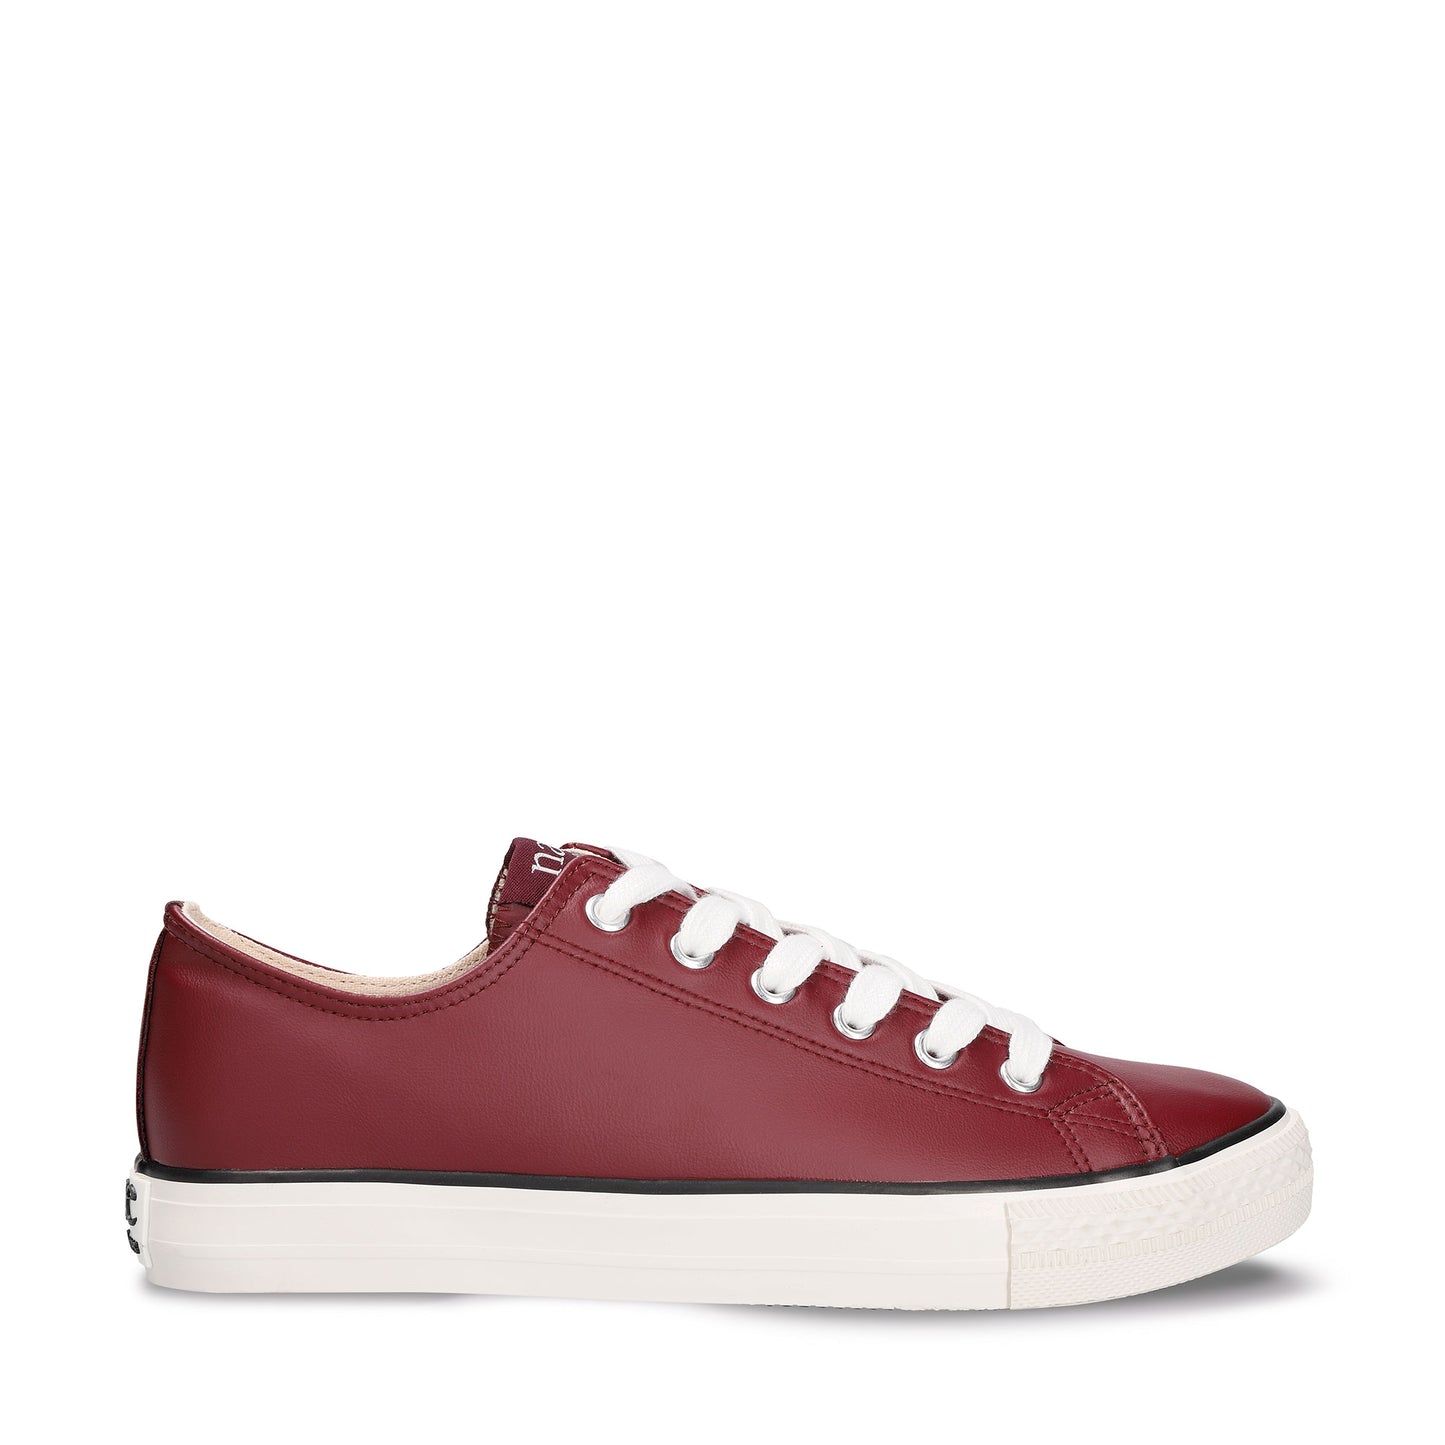 Clove Red Vegan Sneakers Low-Top Lace-Up